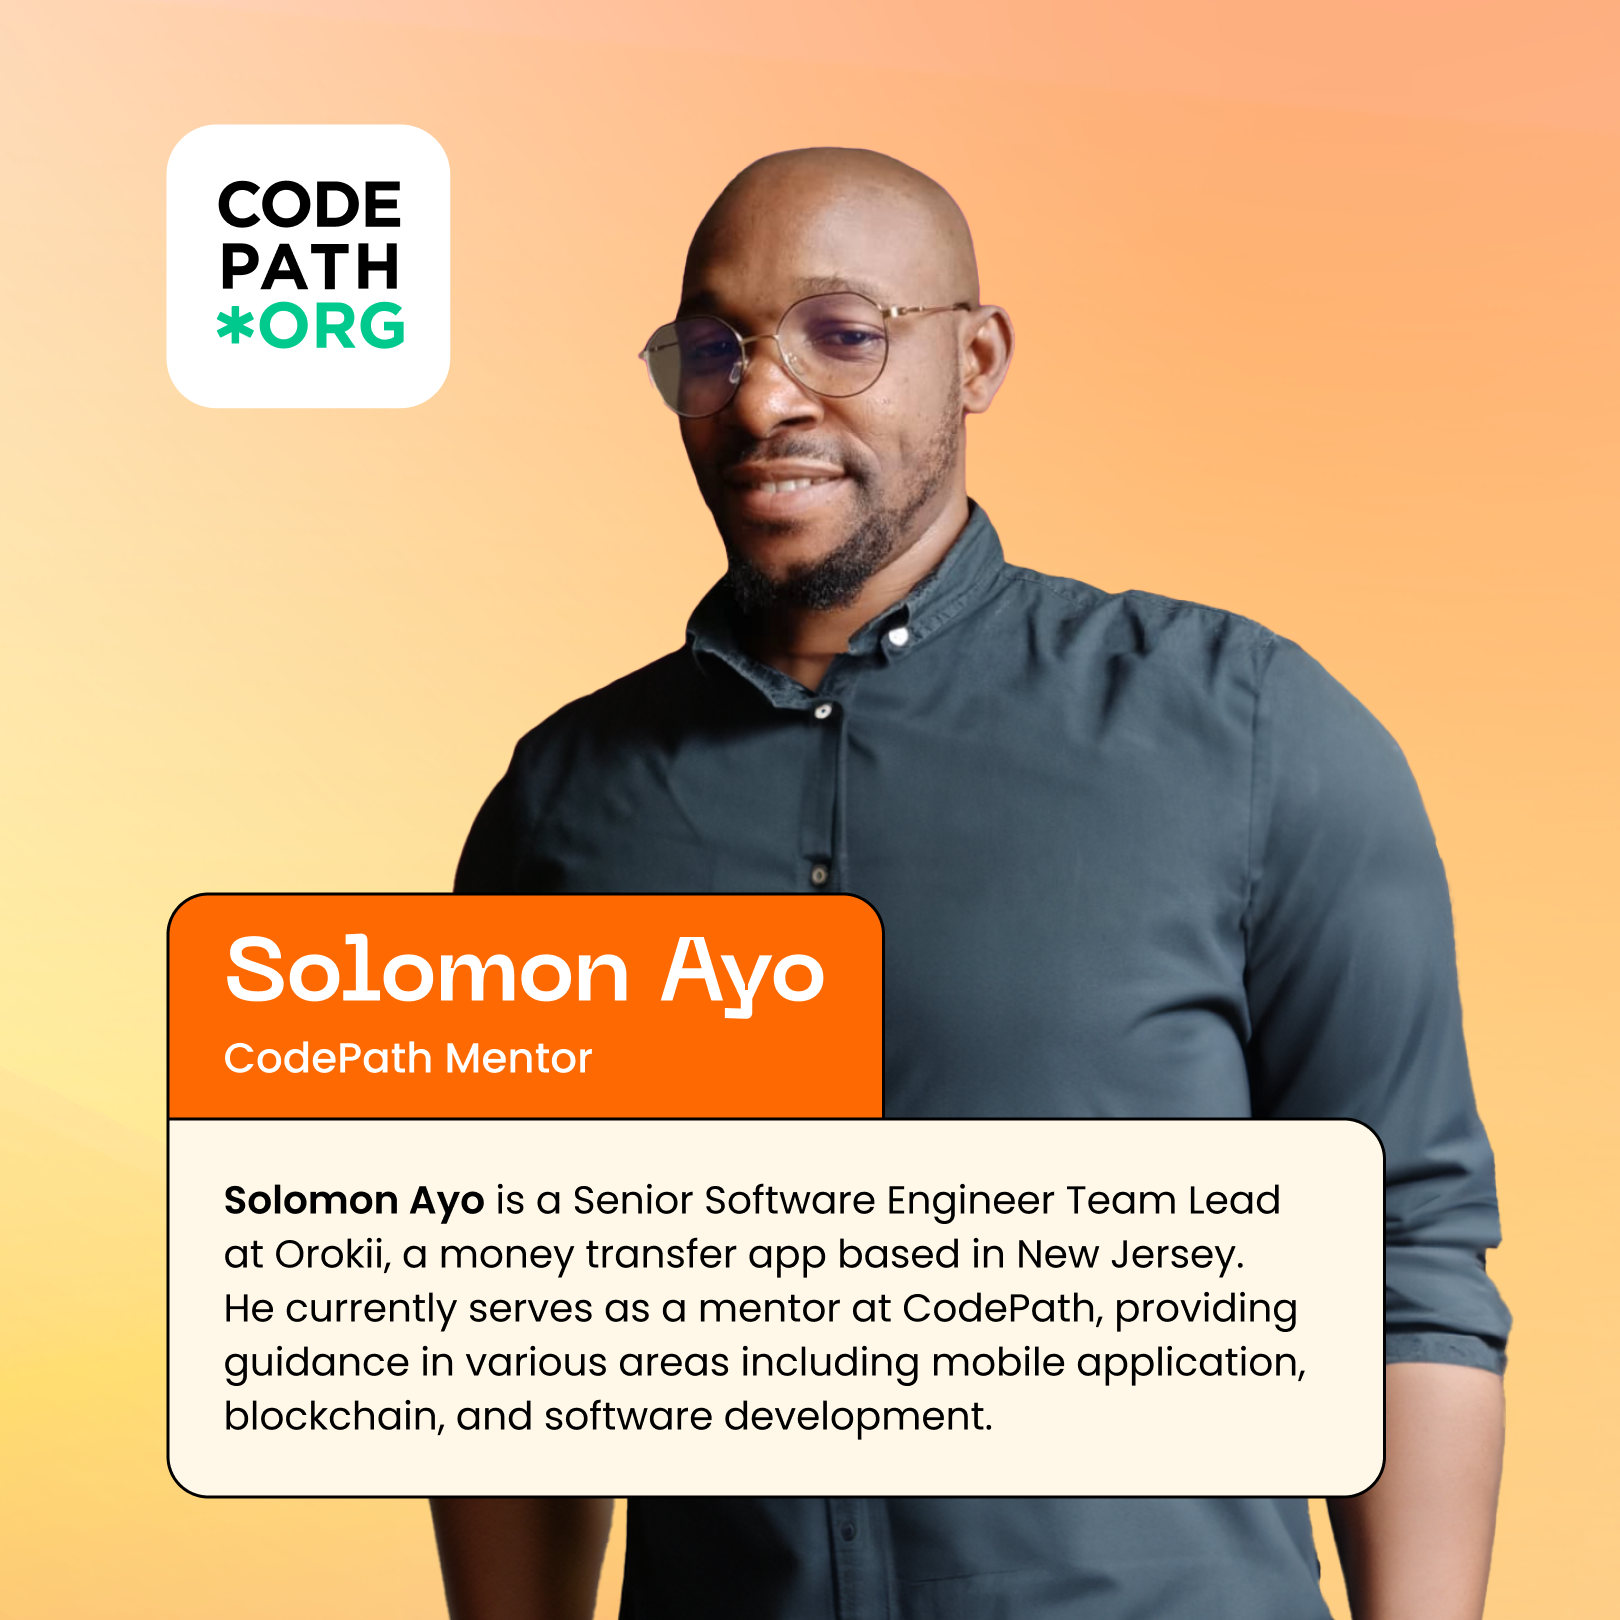 Orange and yellow backdrop with CodePath logo in upper left corner. Solomon Ayo, CodePath Mentor and Volunteer is centered with a caption: Solomon Ayo - Senior Software Engineer Team Lead, CodePath mentor Solomon Ayo is a Team Lead at Orokii, a money transfer app based in New Jersey. He currently serves as a mentor at CodePath, providing guidance in various areas including mobile application, blockchain, and software development. 